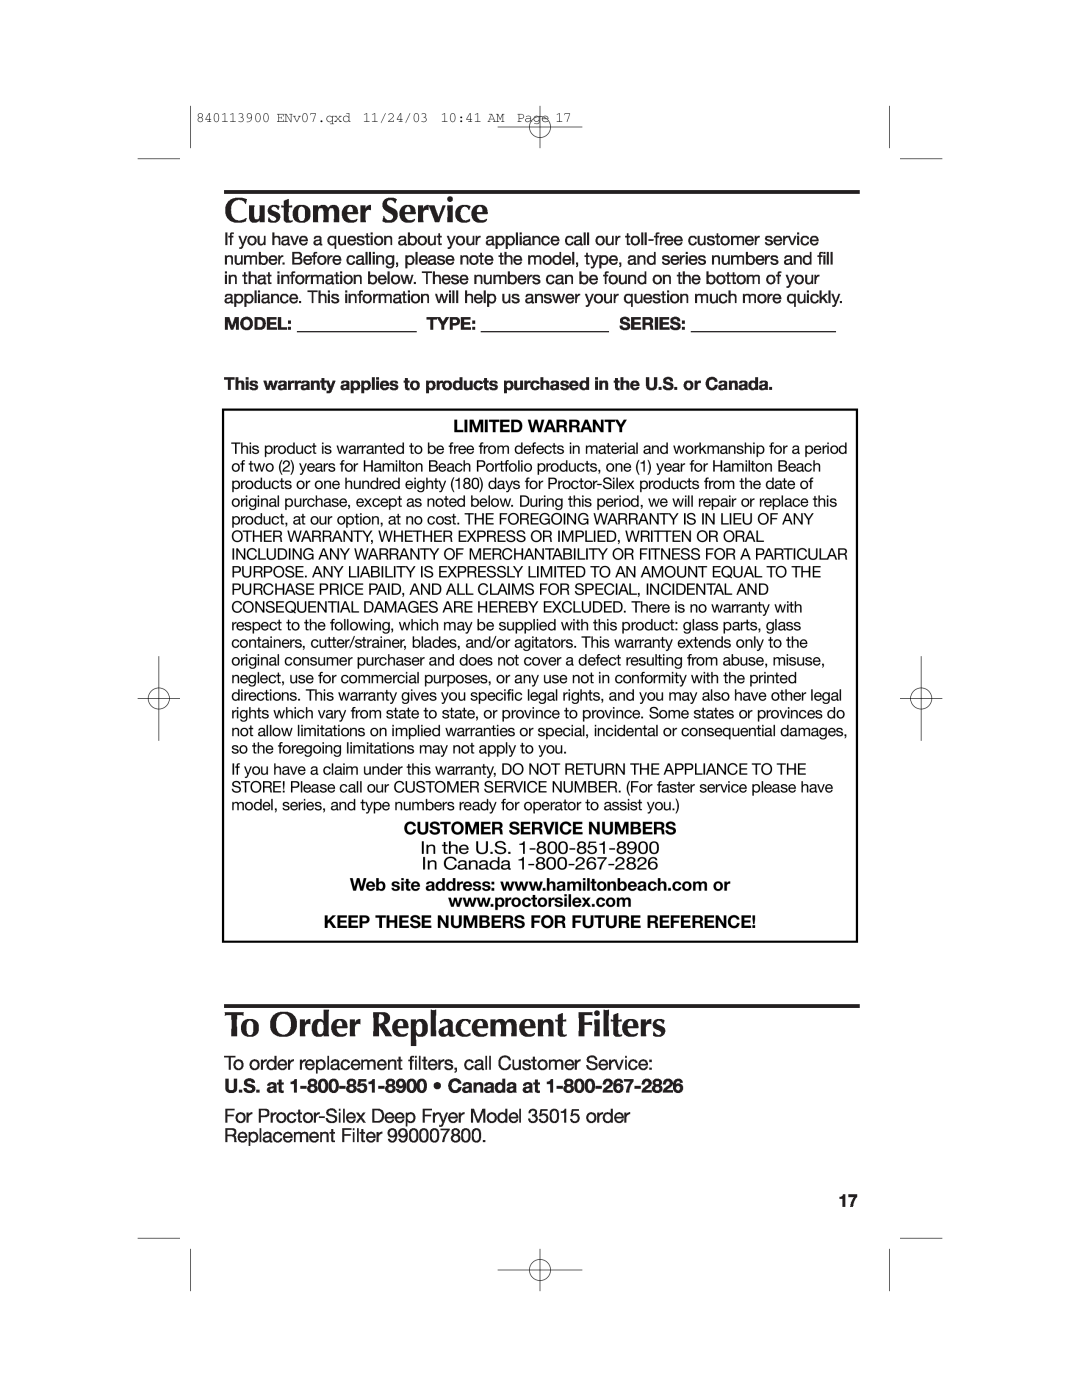 Hamilton Beach manual Customer Service, To Order Replacement Filters, For Proctor-SilexDeep Fryer Model 35015 order 